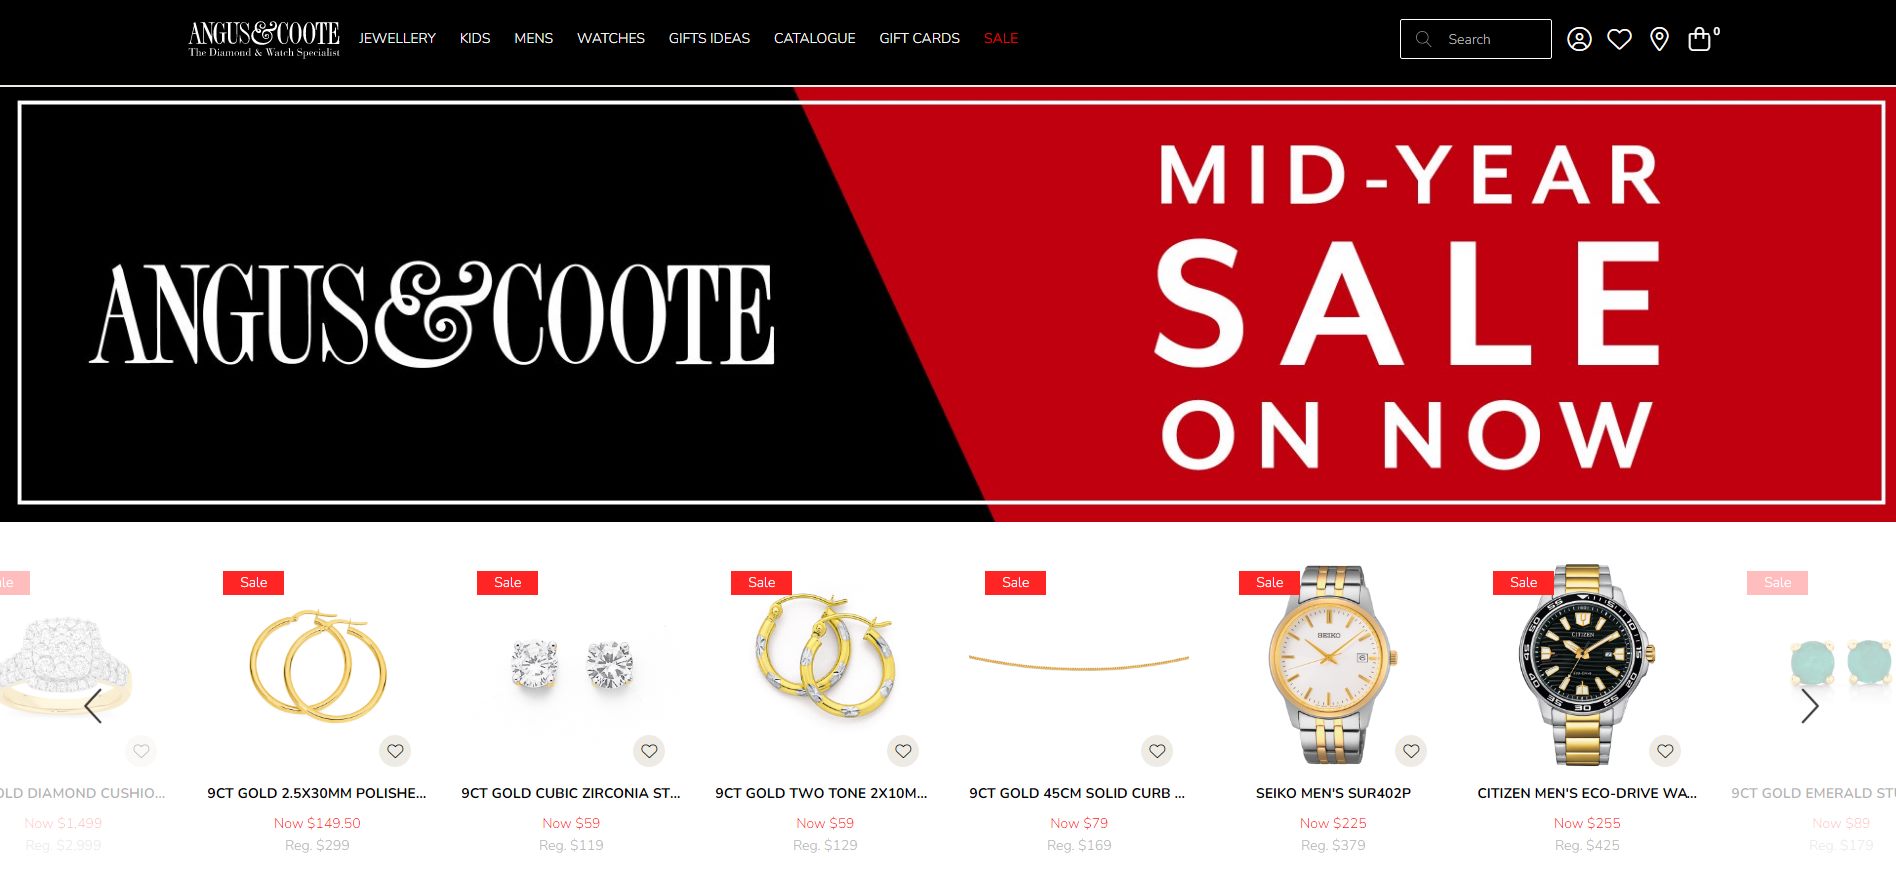 angus & coote engagement rings & wedding band shop melbourne